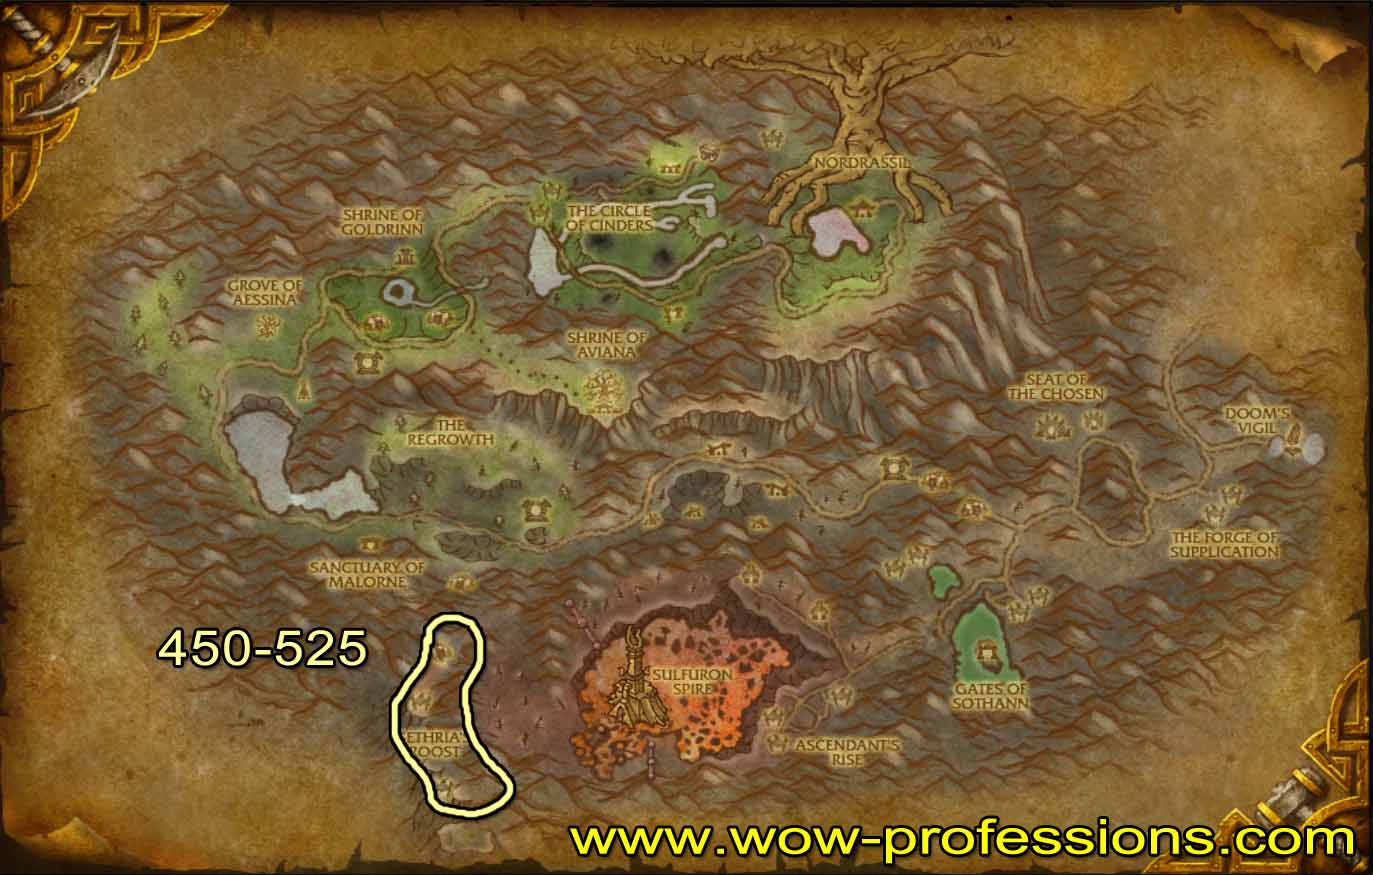 http://www.wow-professions.com/images/skinning-maps/mount-hyal-skinning-map.jpg